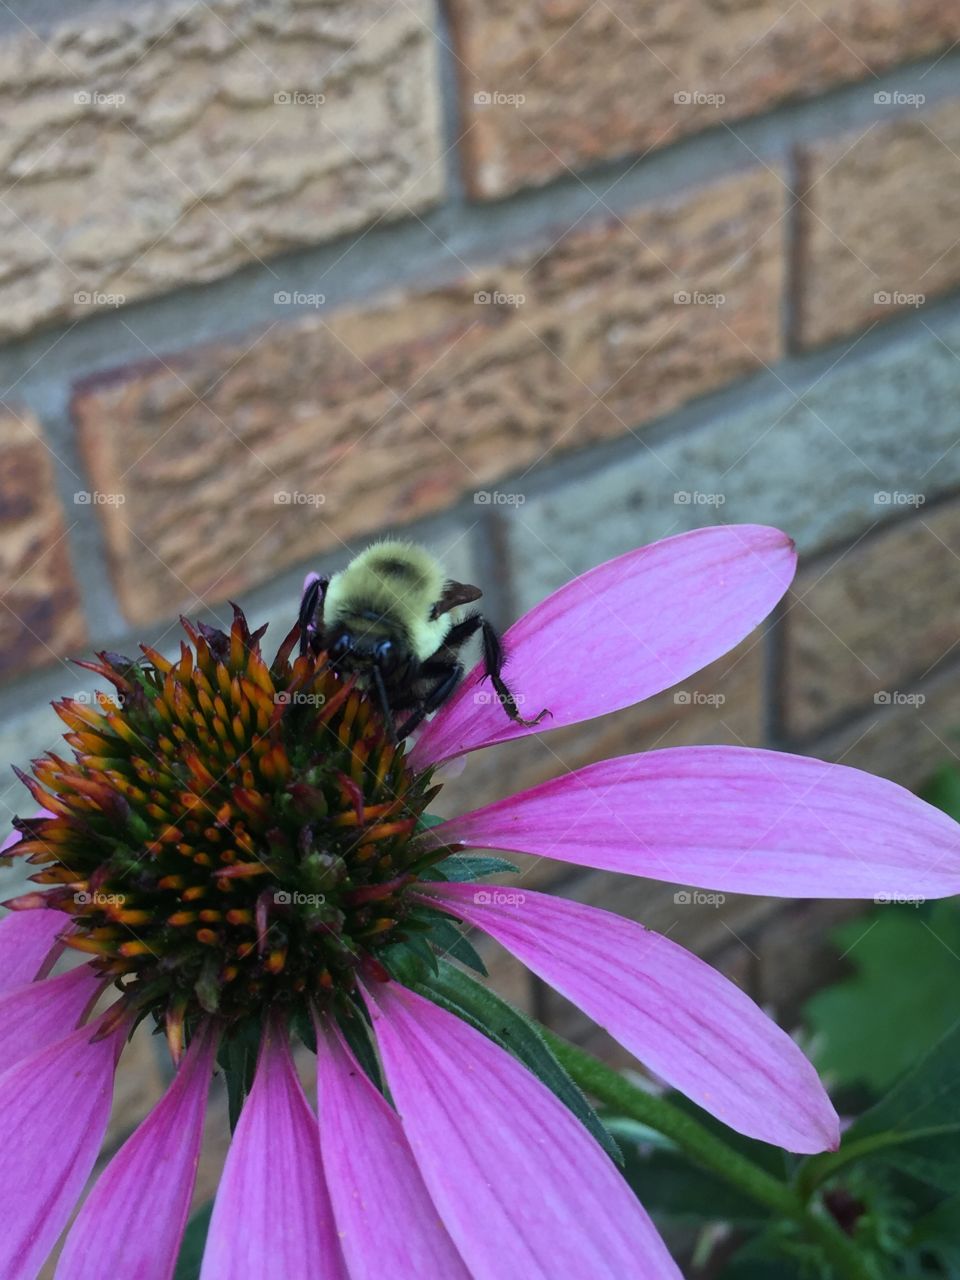 Home flowers. Bees pollination 